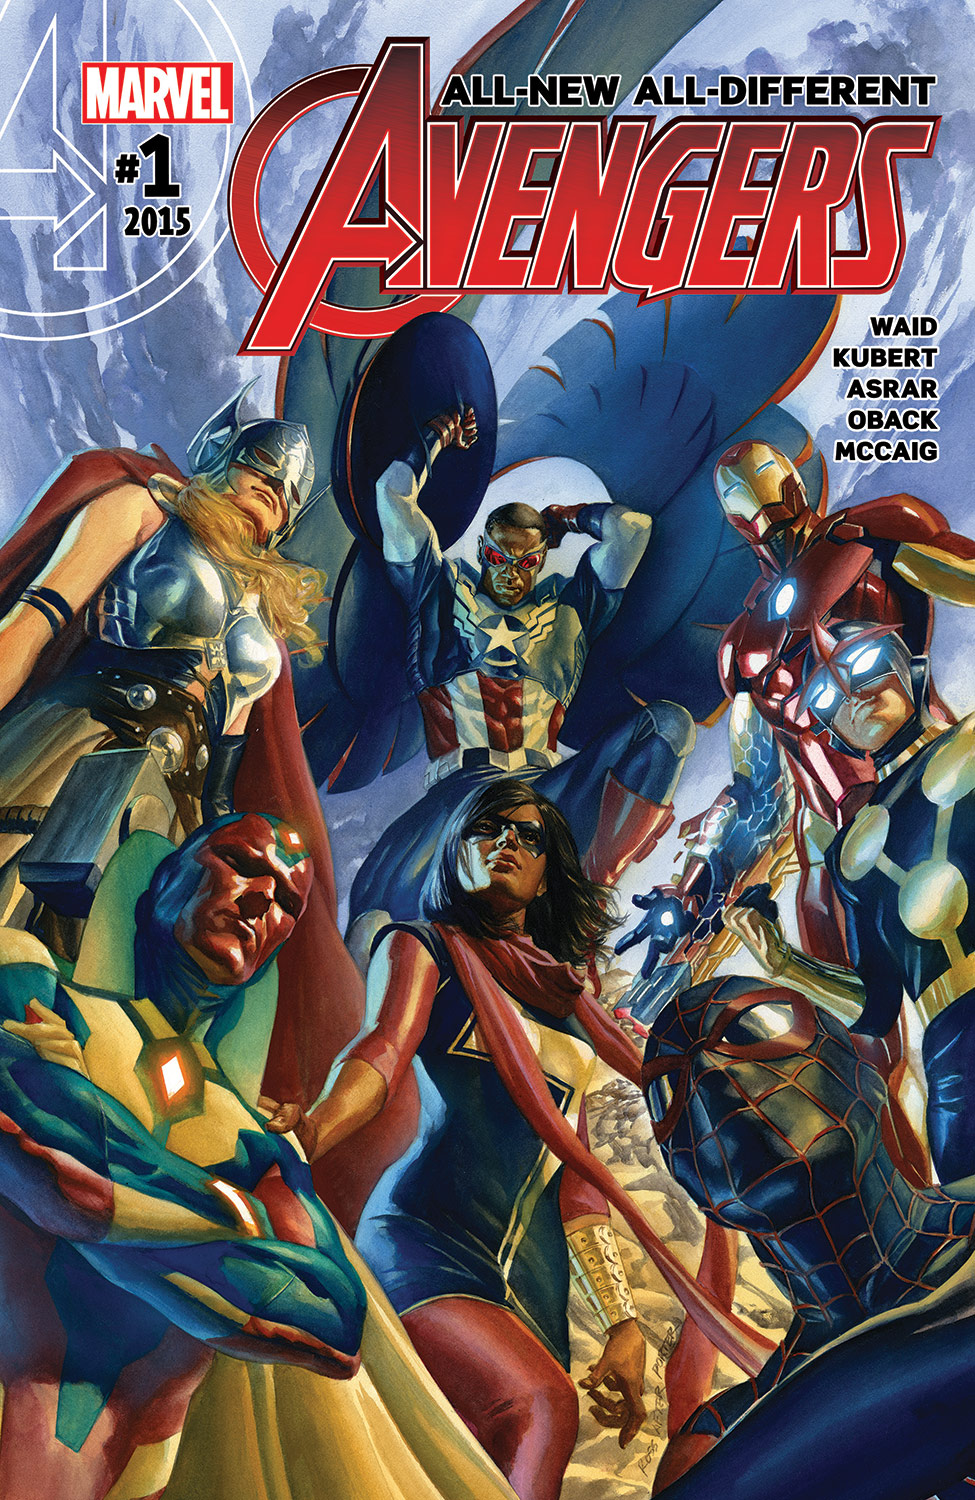 2015 ALL NEW ALL DIFFERENT AVENGERS #1 MARQUEZ VARIANT COVER MARVEL COMIC LCSD